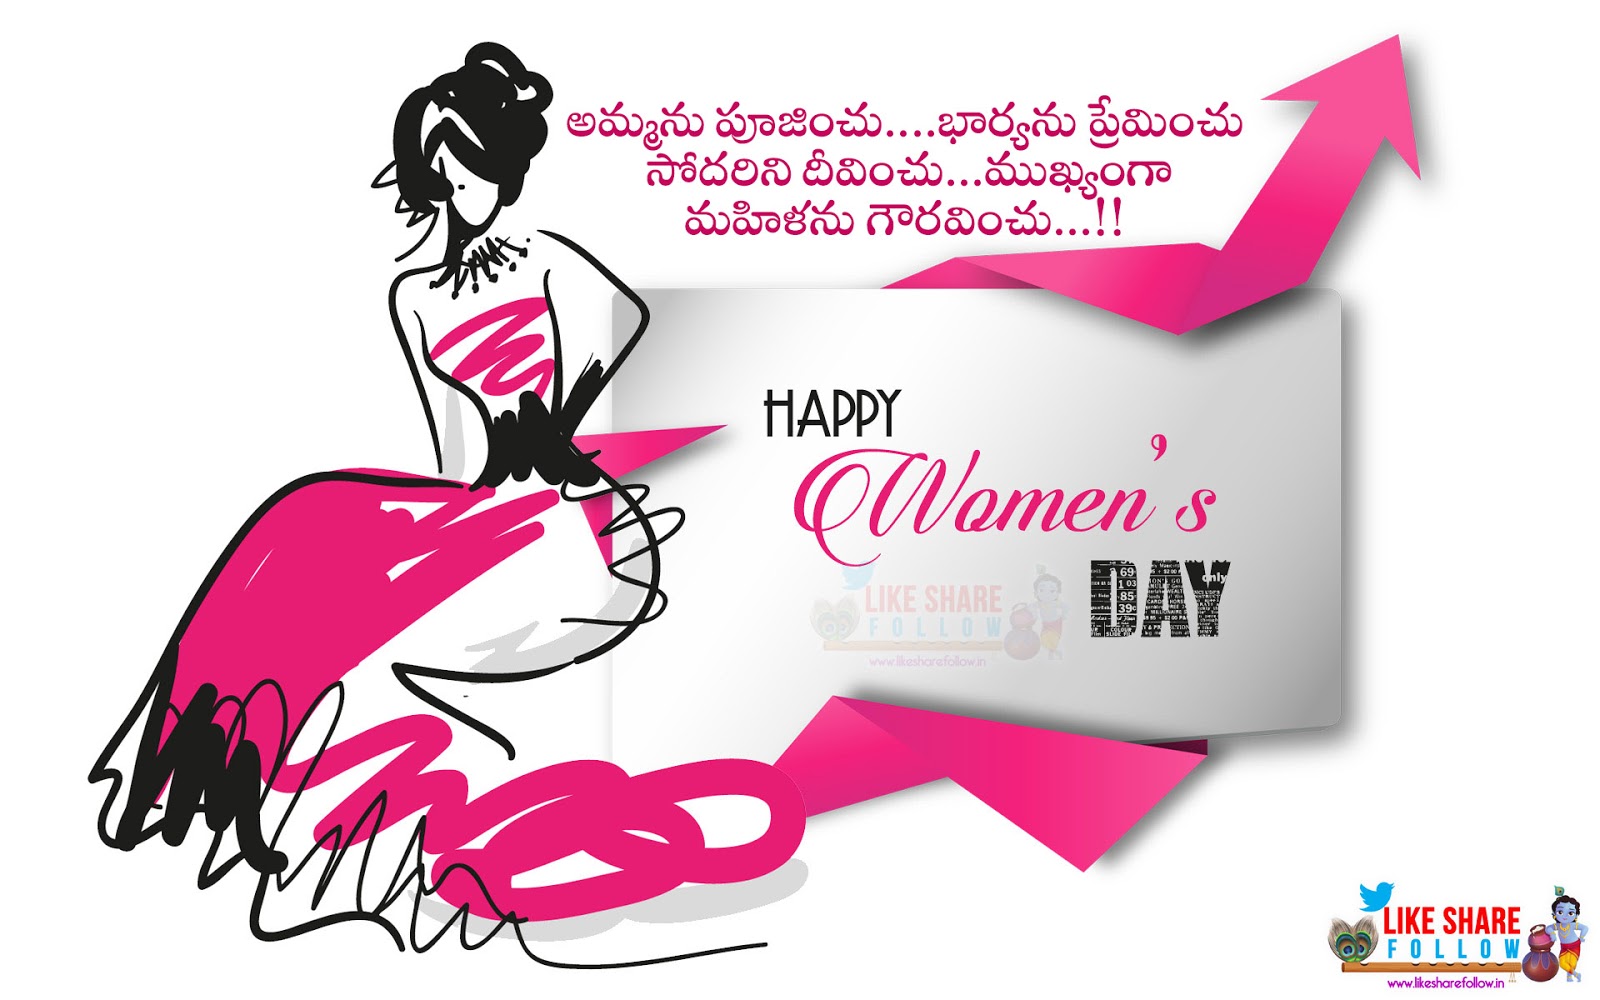 Happy Womens Day 2018 Greetings In Telugu Images Like Share Follow